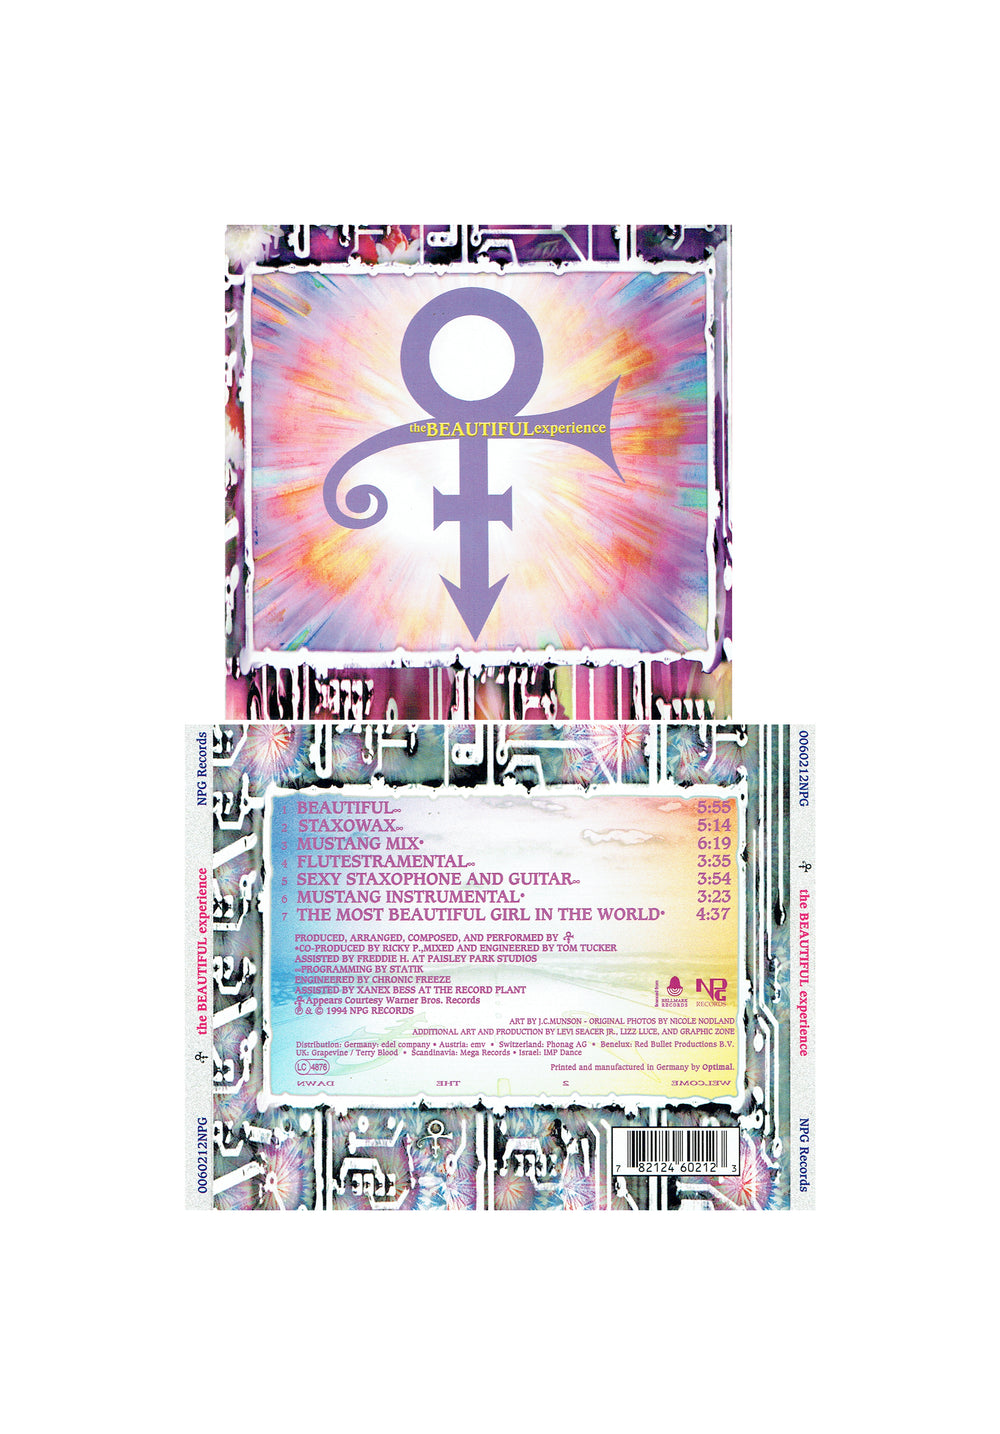 Prince – 0(+>The Beautiful Experience CD Album Butterfly Cut Out UK Preloved:1994